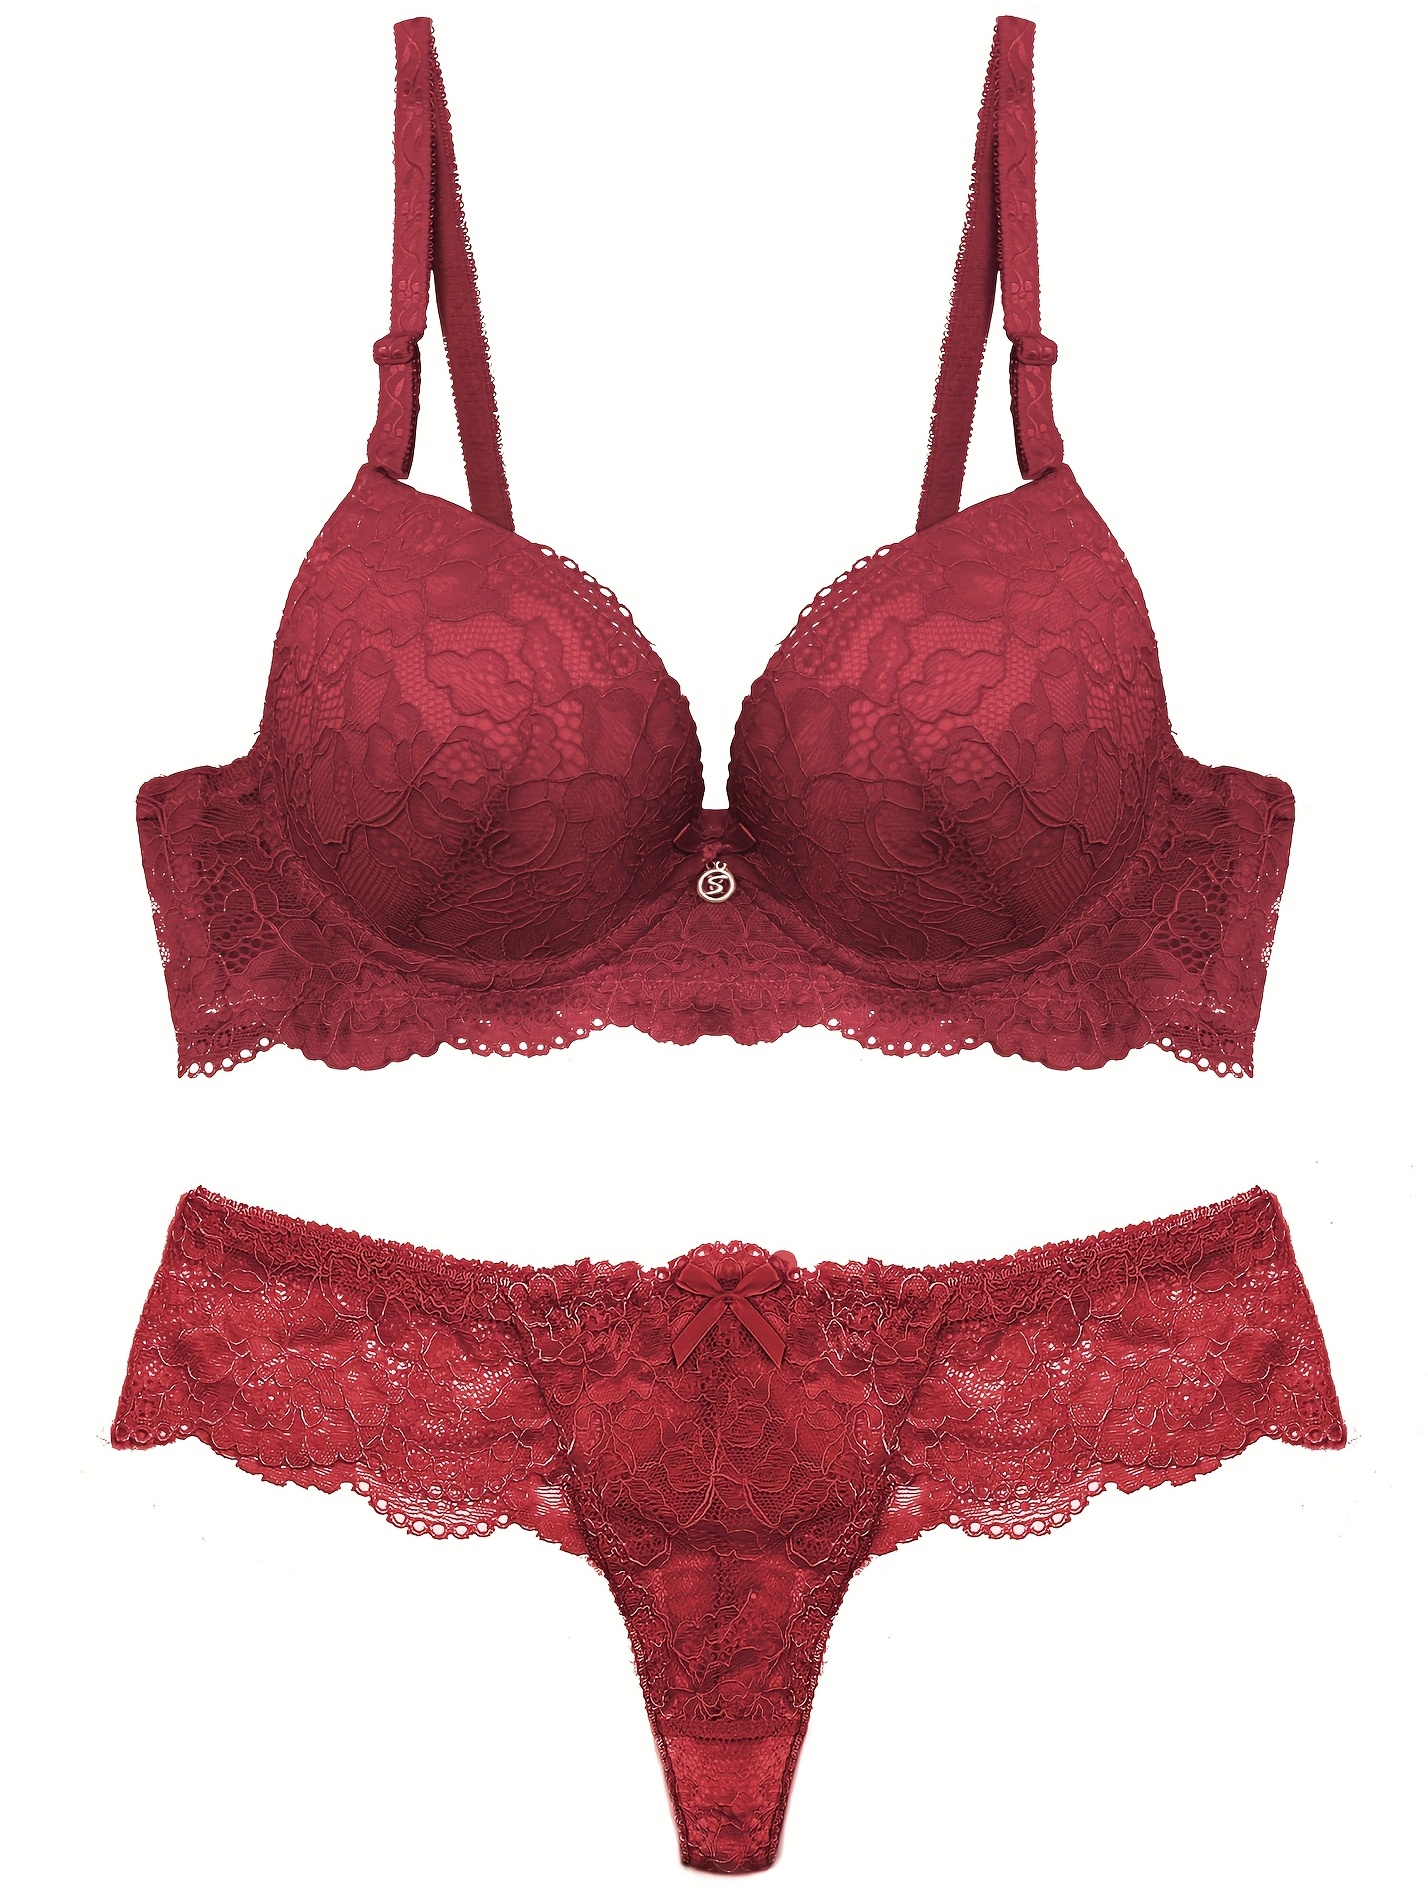 Sexy Bra And Panty Set Lingerie Set For Women 2 Piece Lace Bralette And  Panty Set S-3xl